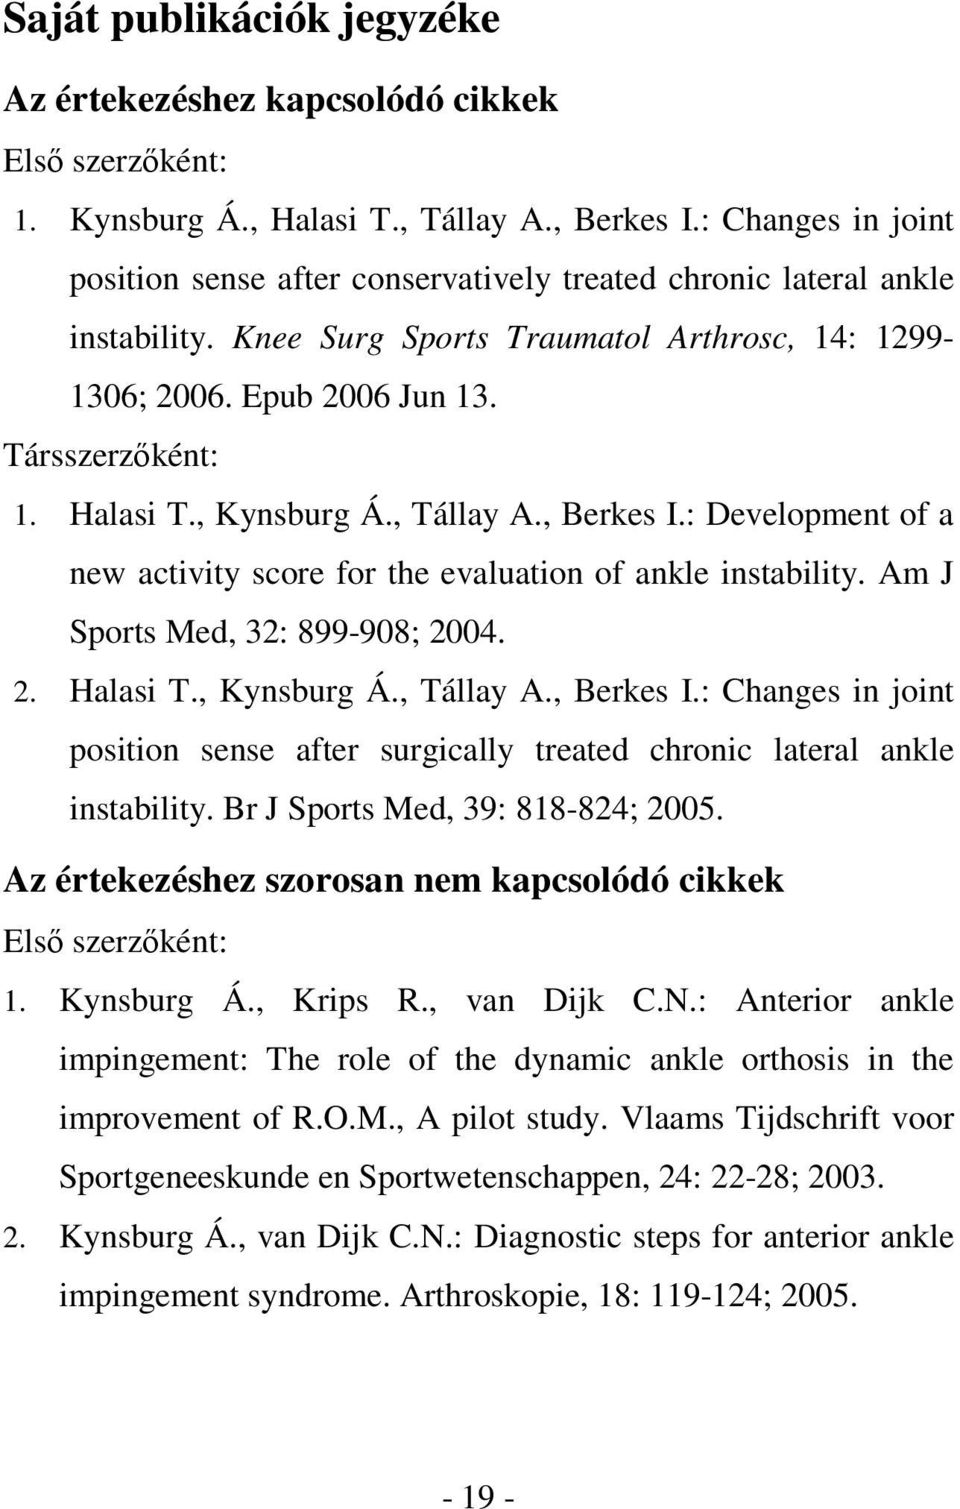 Halasi T., Kynsburg Á., Tállay A., Berkes I.: Development of a new activity score for the evaluation of ankle instability. Am J Sports Med, 32: 899-908; 2004. 2. Halasi T., Kynsburg Á., Tállay A., Berkes I.: Changes in joint position sense after surgically treated chronic lateral ankle instability.